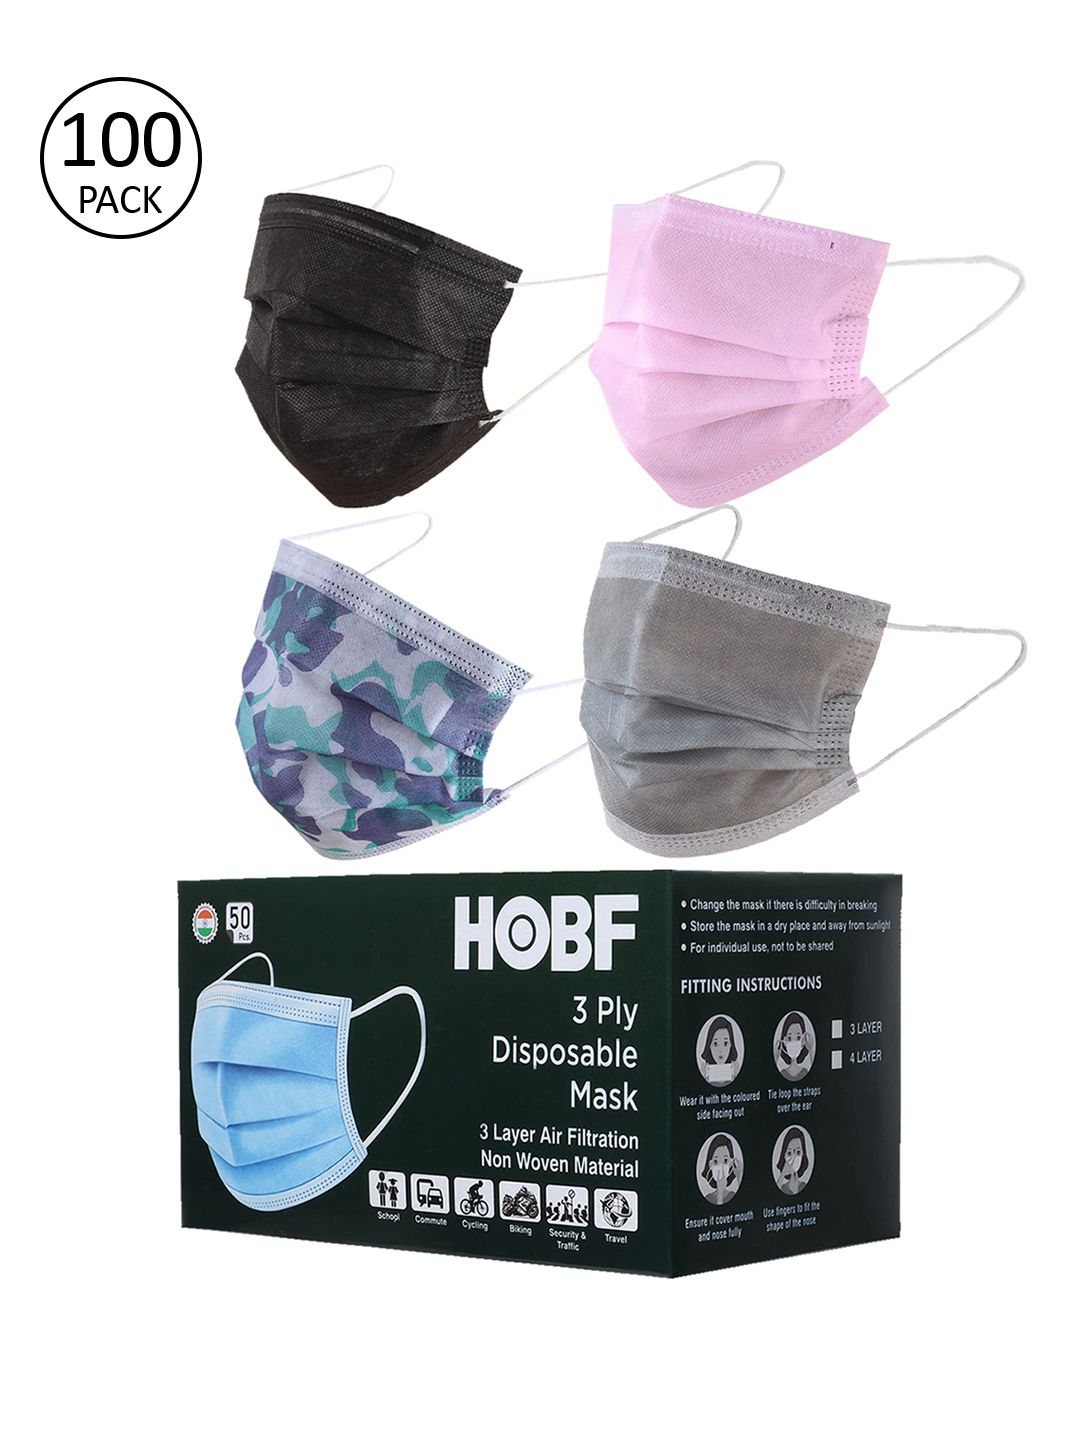 Swiss Design Pack Of 100 Assorted 3-Ply Surgical Masks Price in India